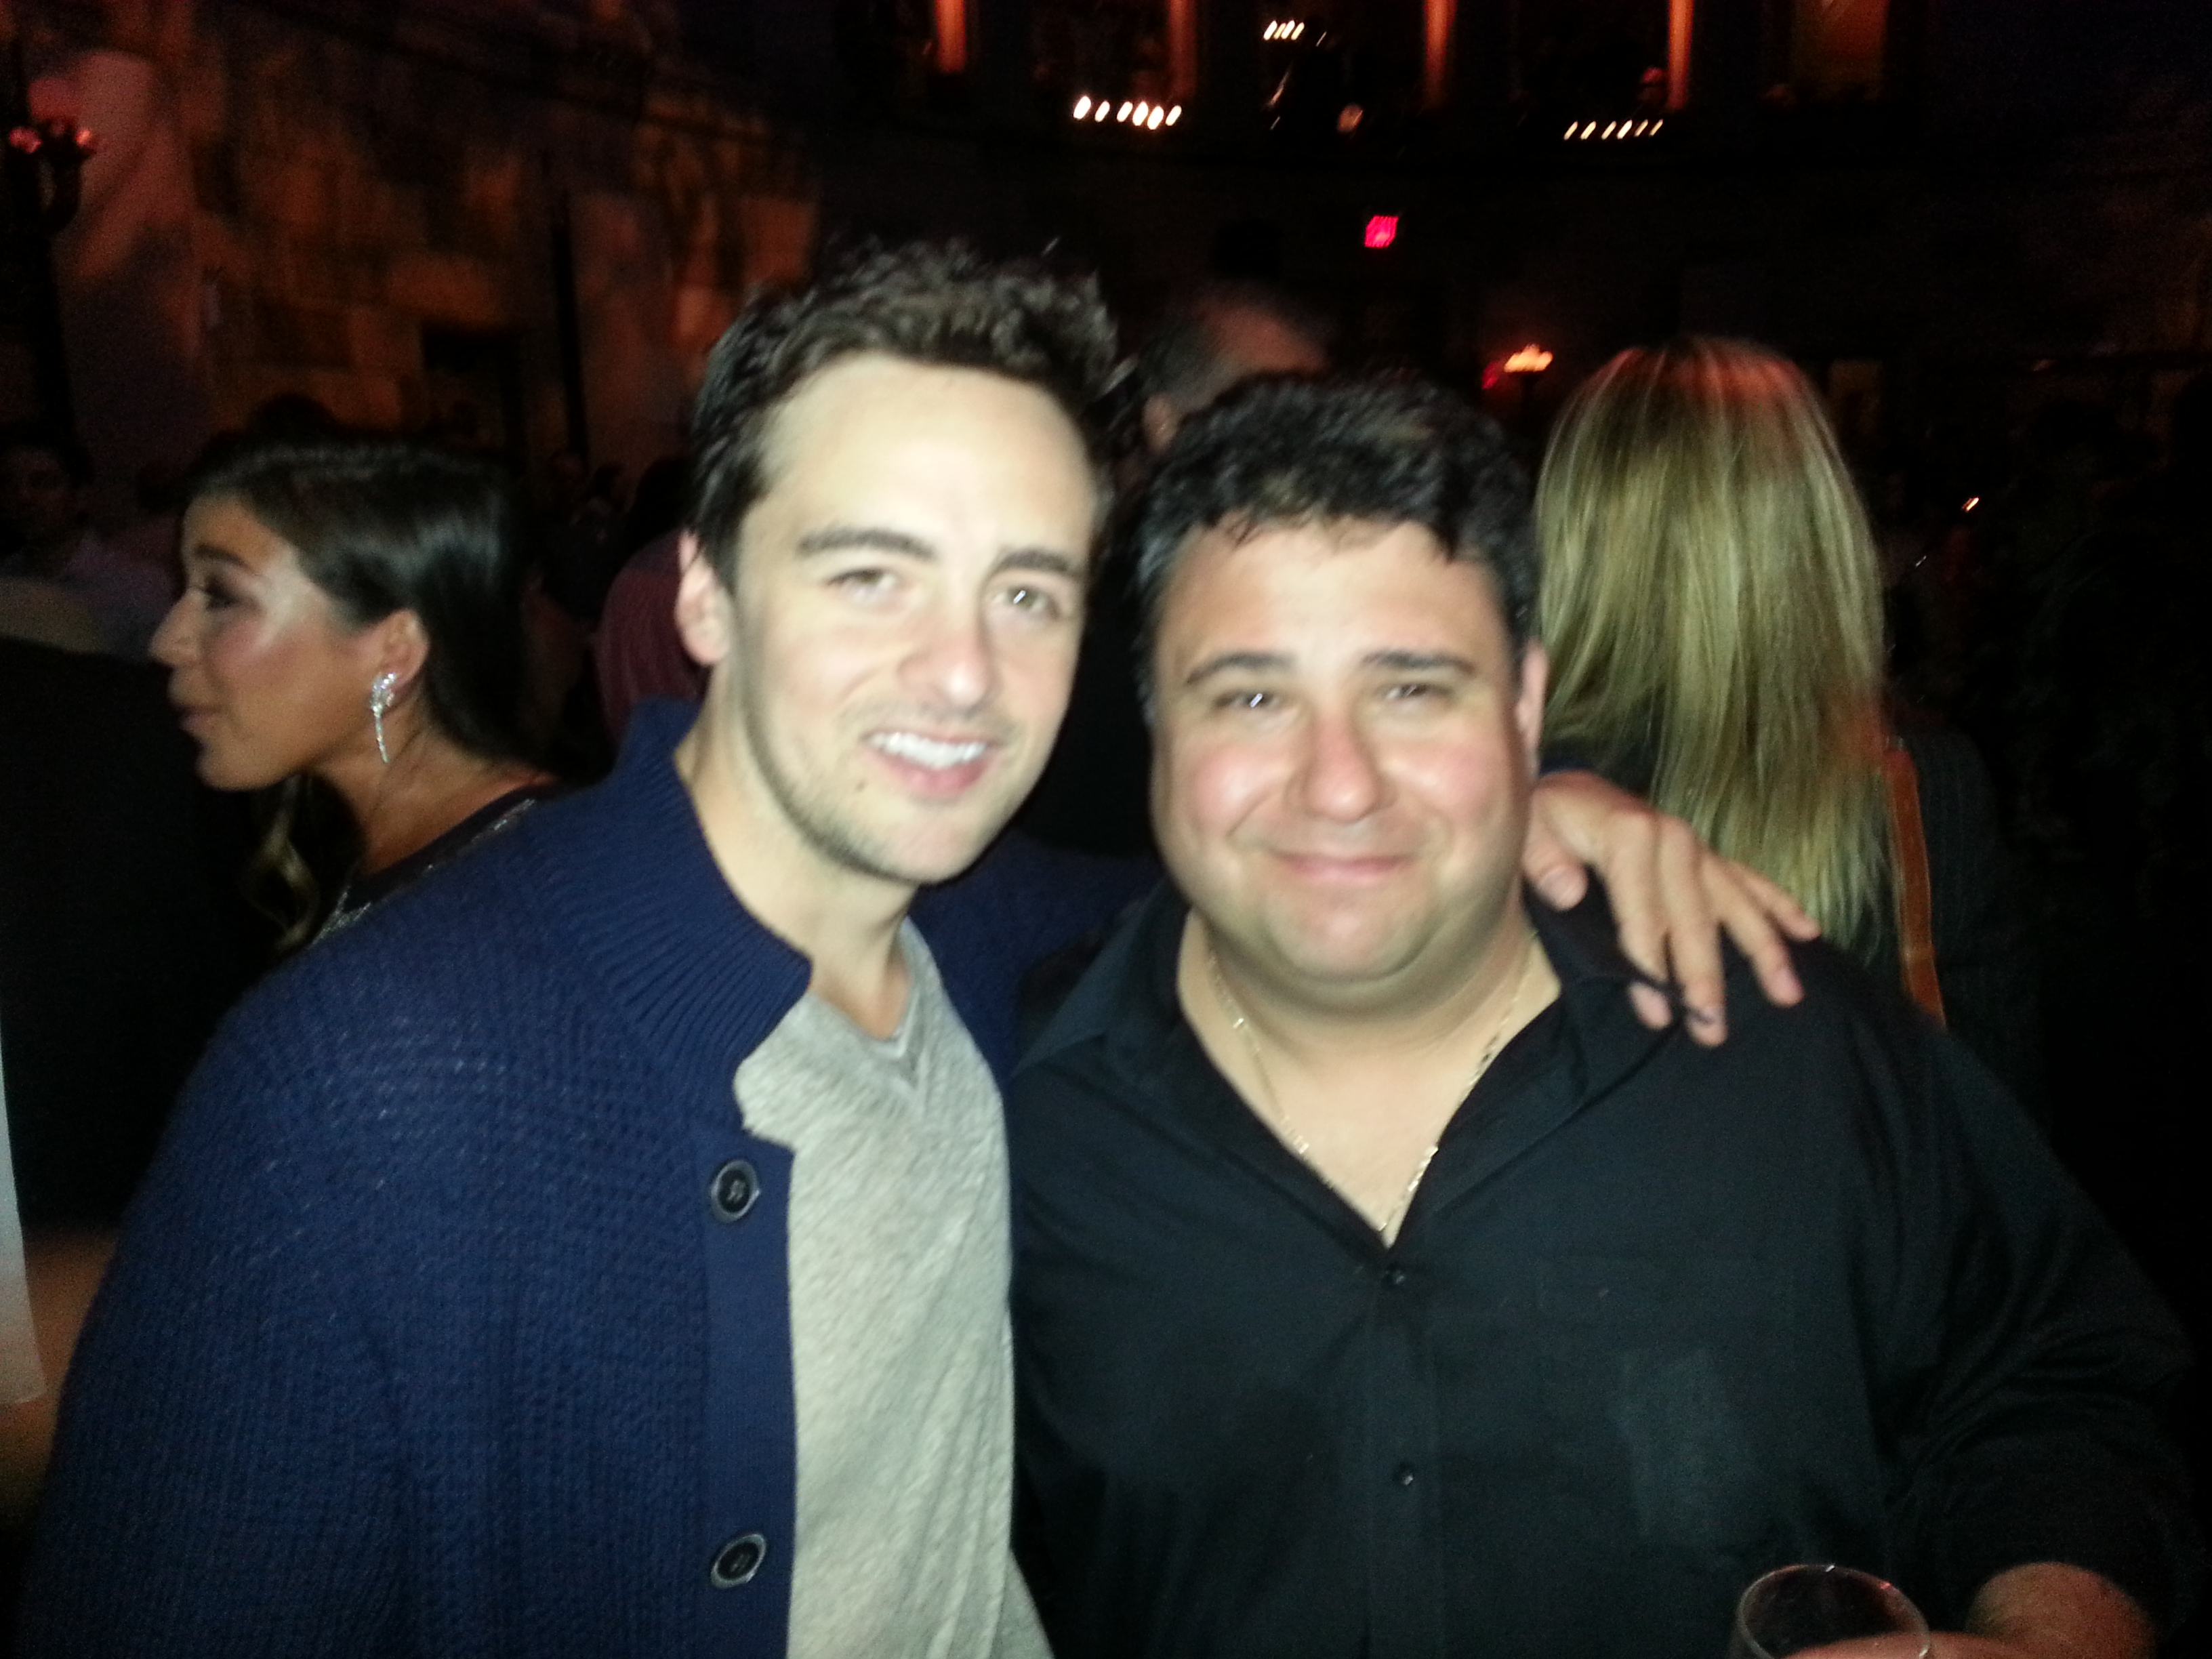 Vincent Piazza and Mike massimino At the Boardwalk Empire wrap party.